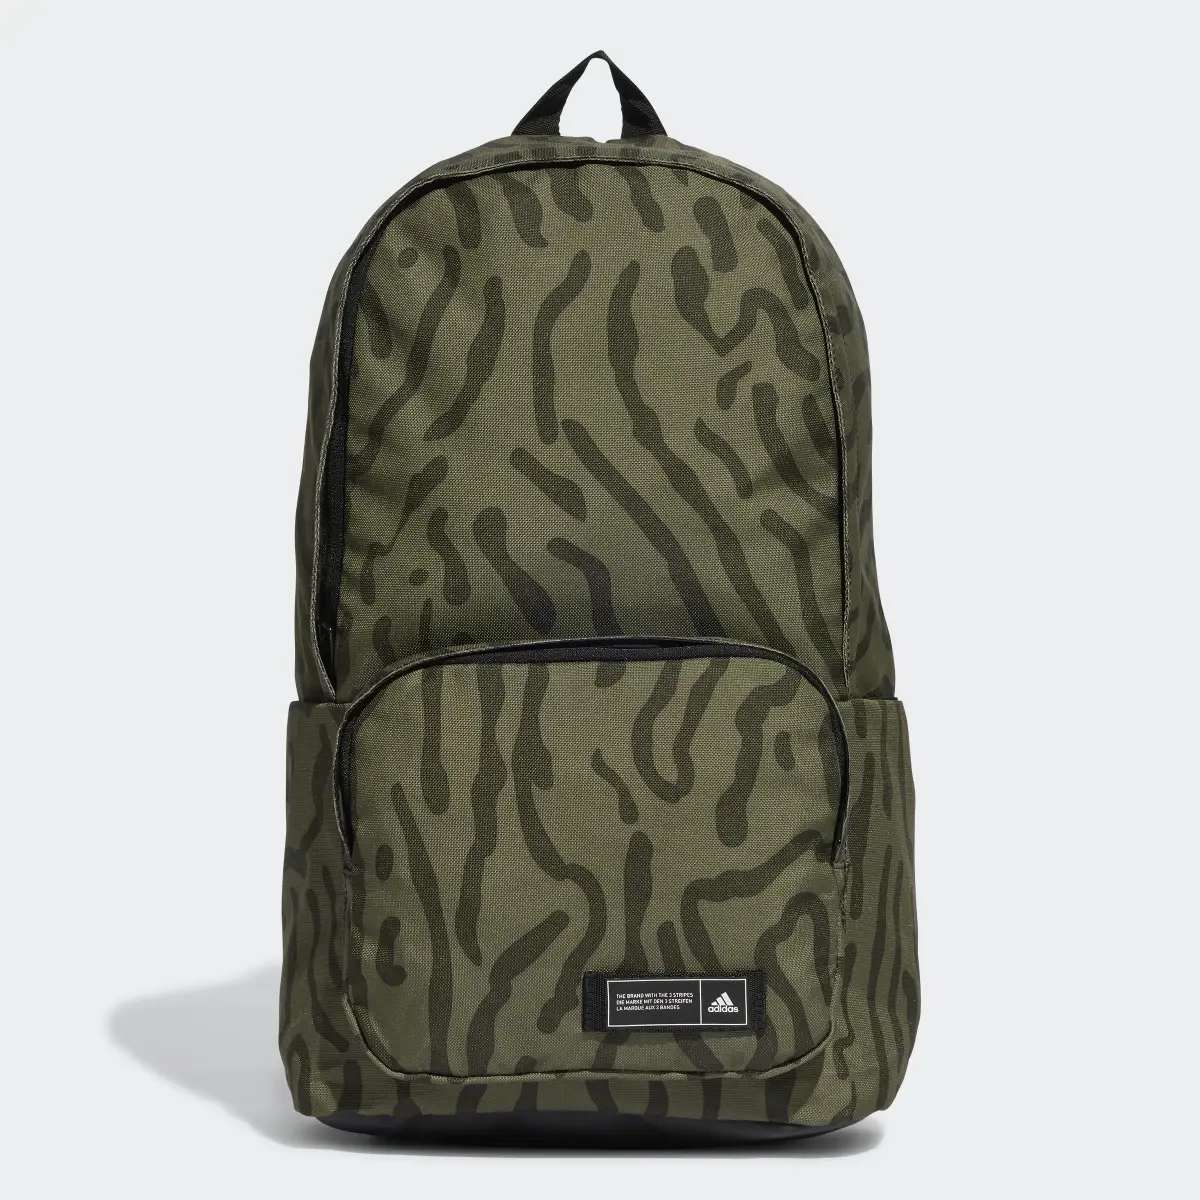 Adidas Classic Texture Graphic Backpack. 2